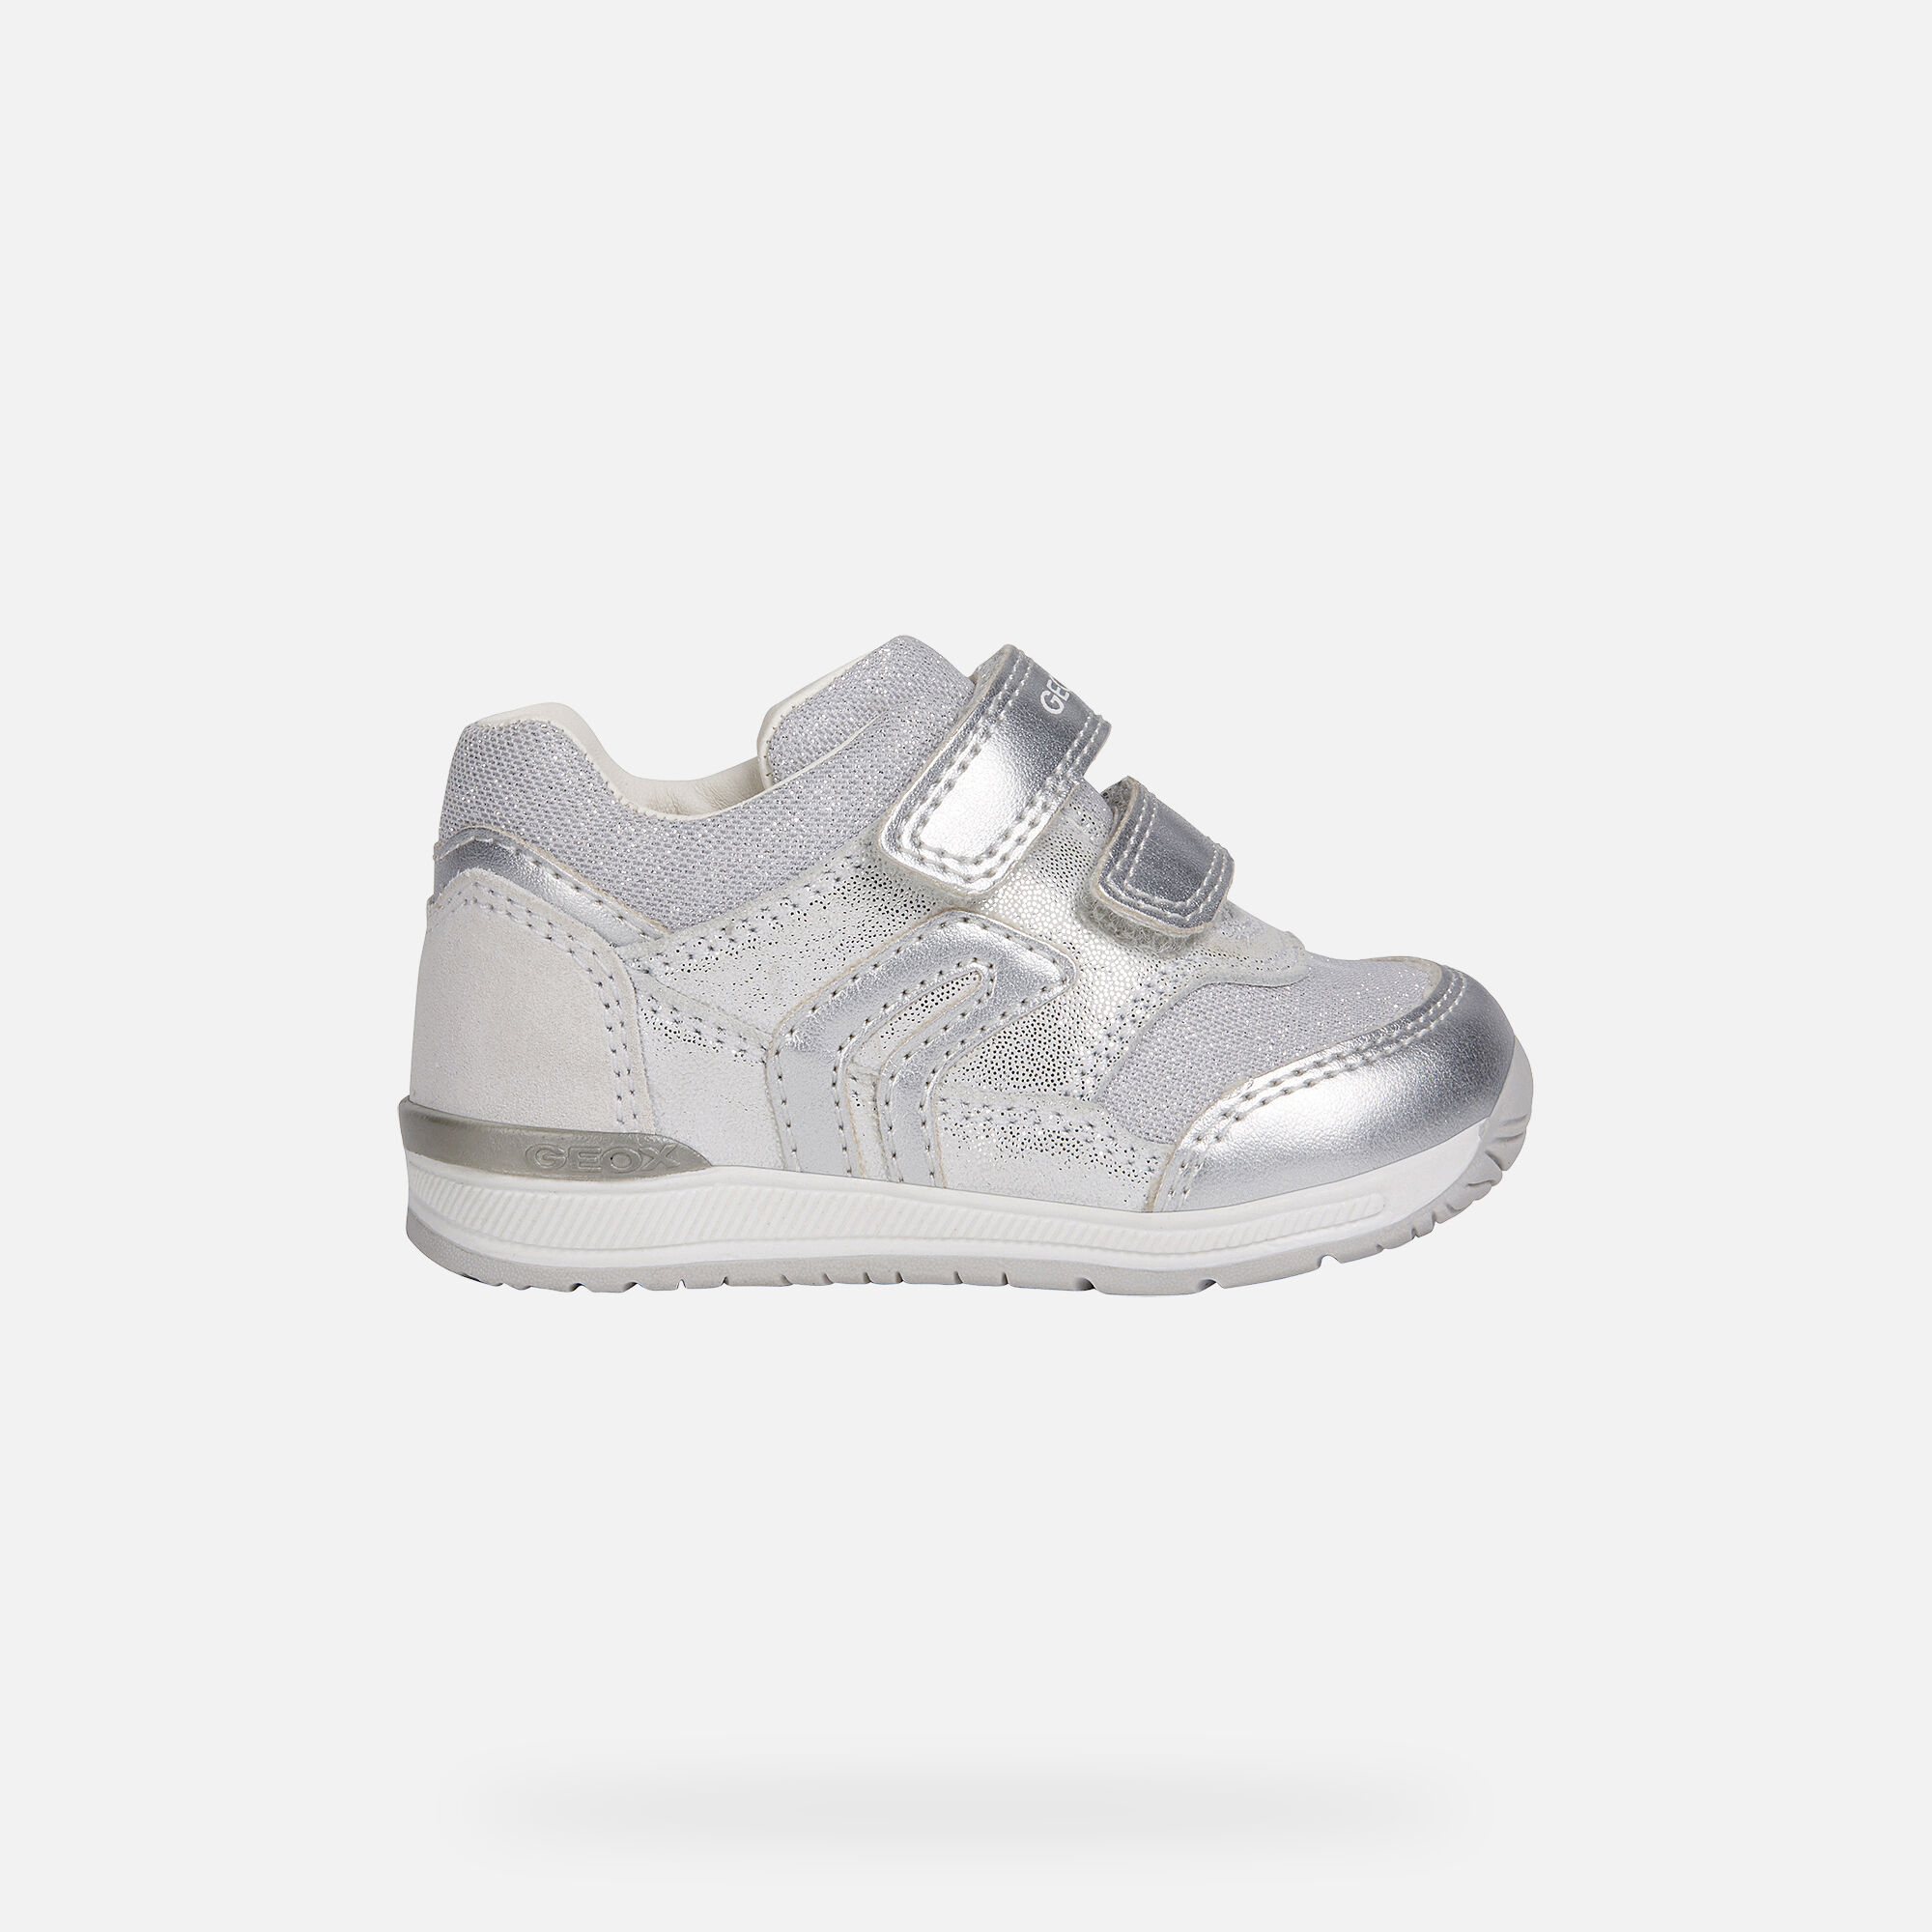 baby girl white tennis shoes